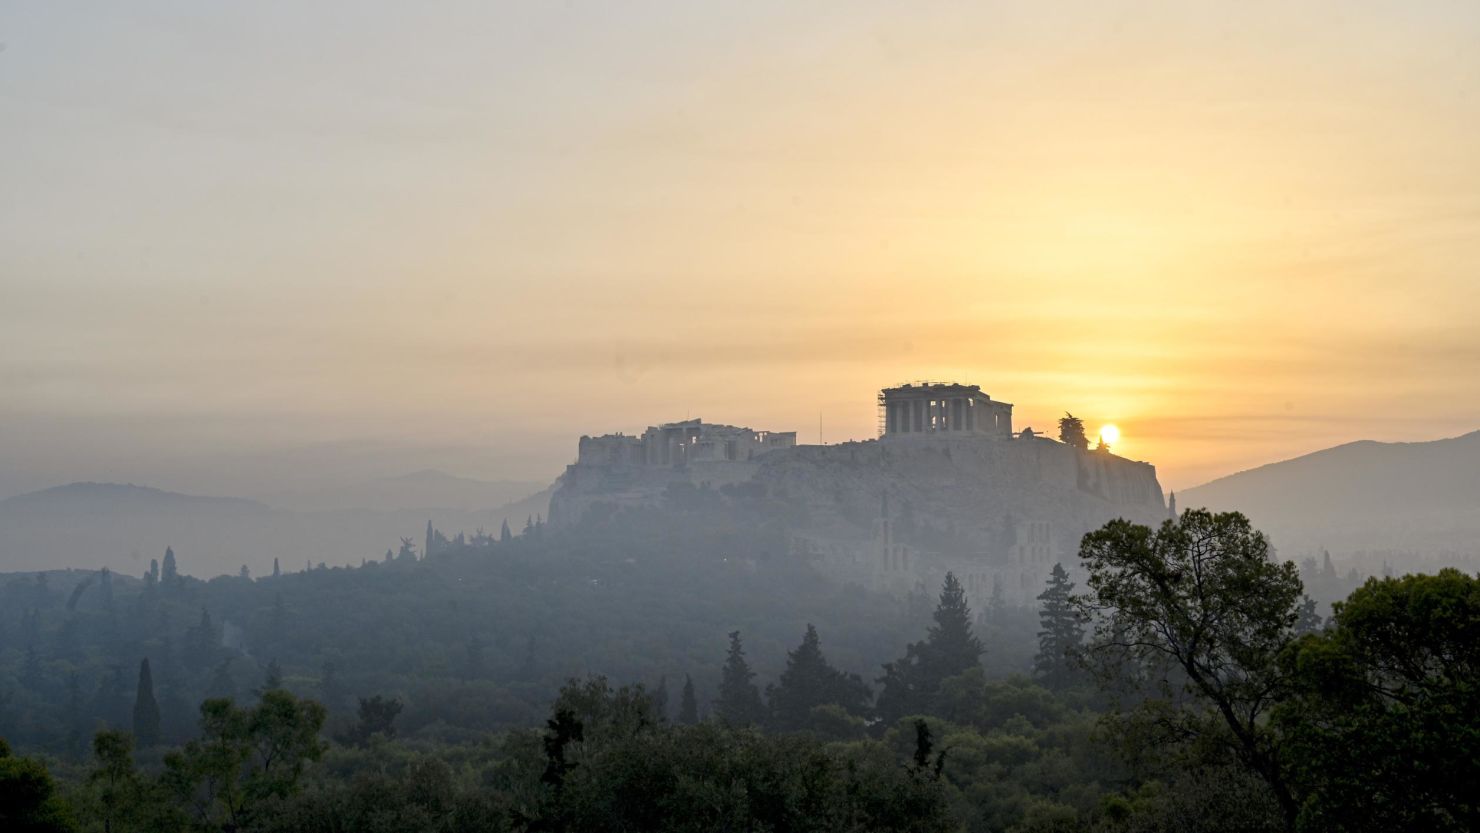 The acropolis was obscured by smoke from wildfires in the Athens suburbs on August 4.